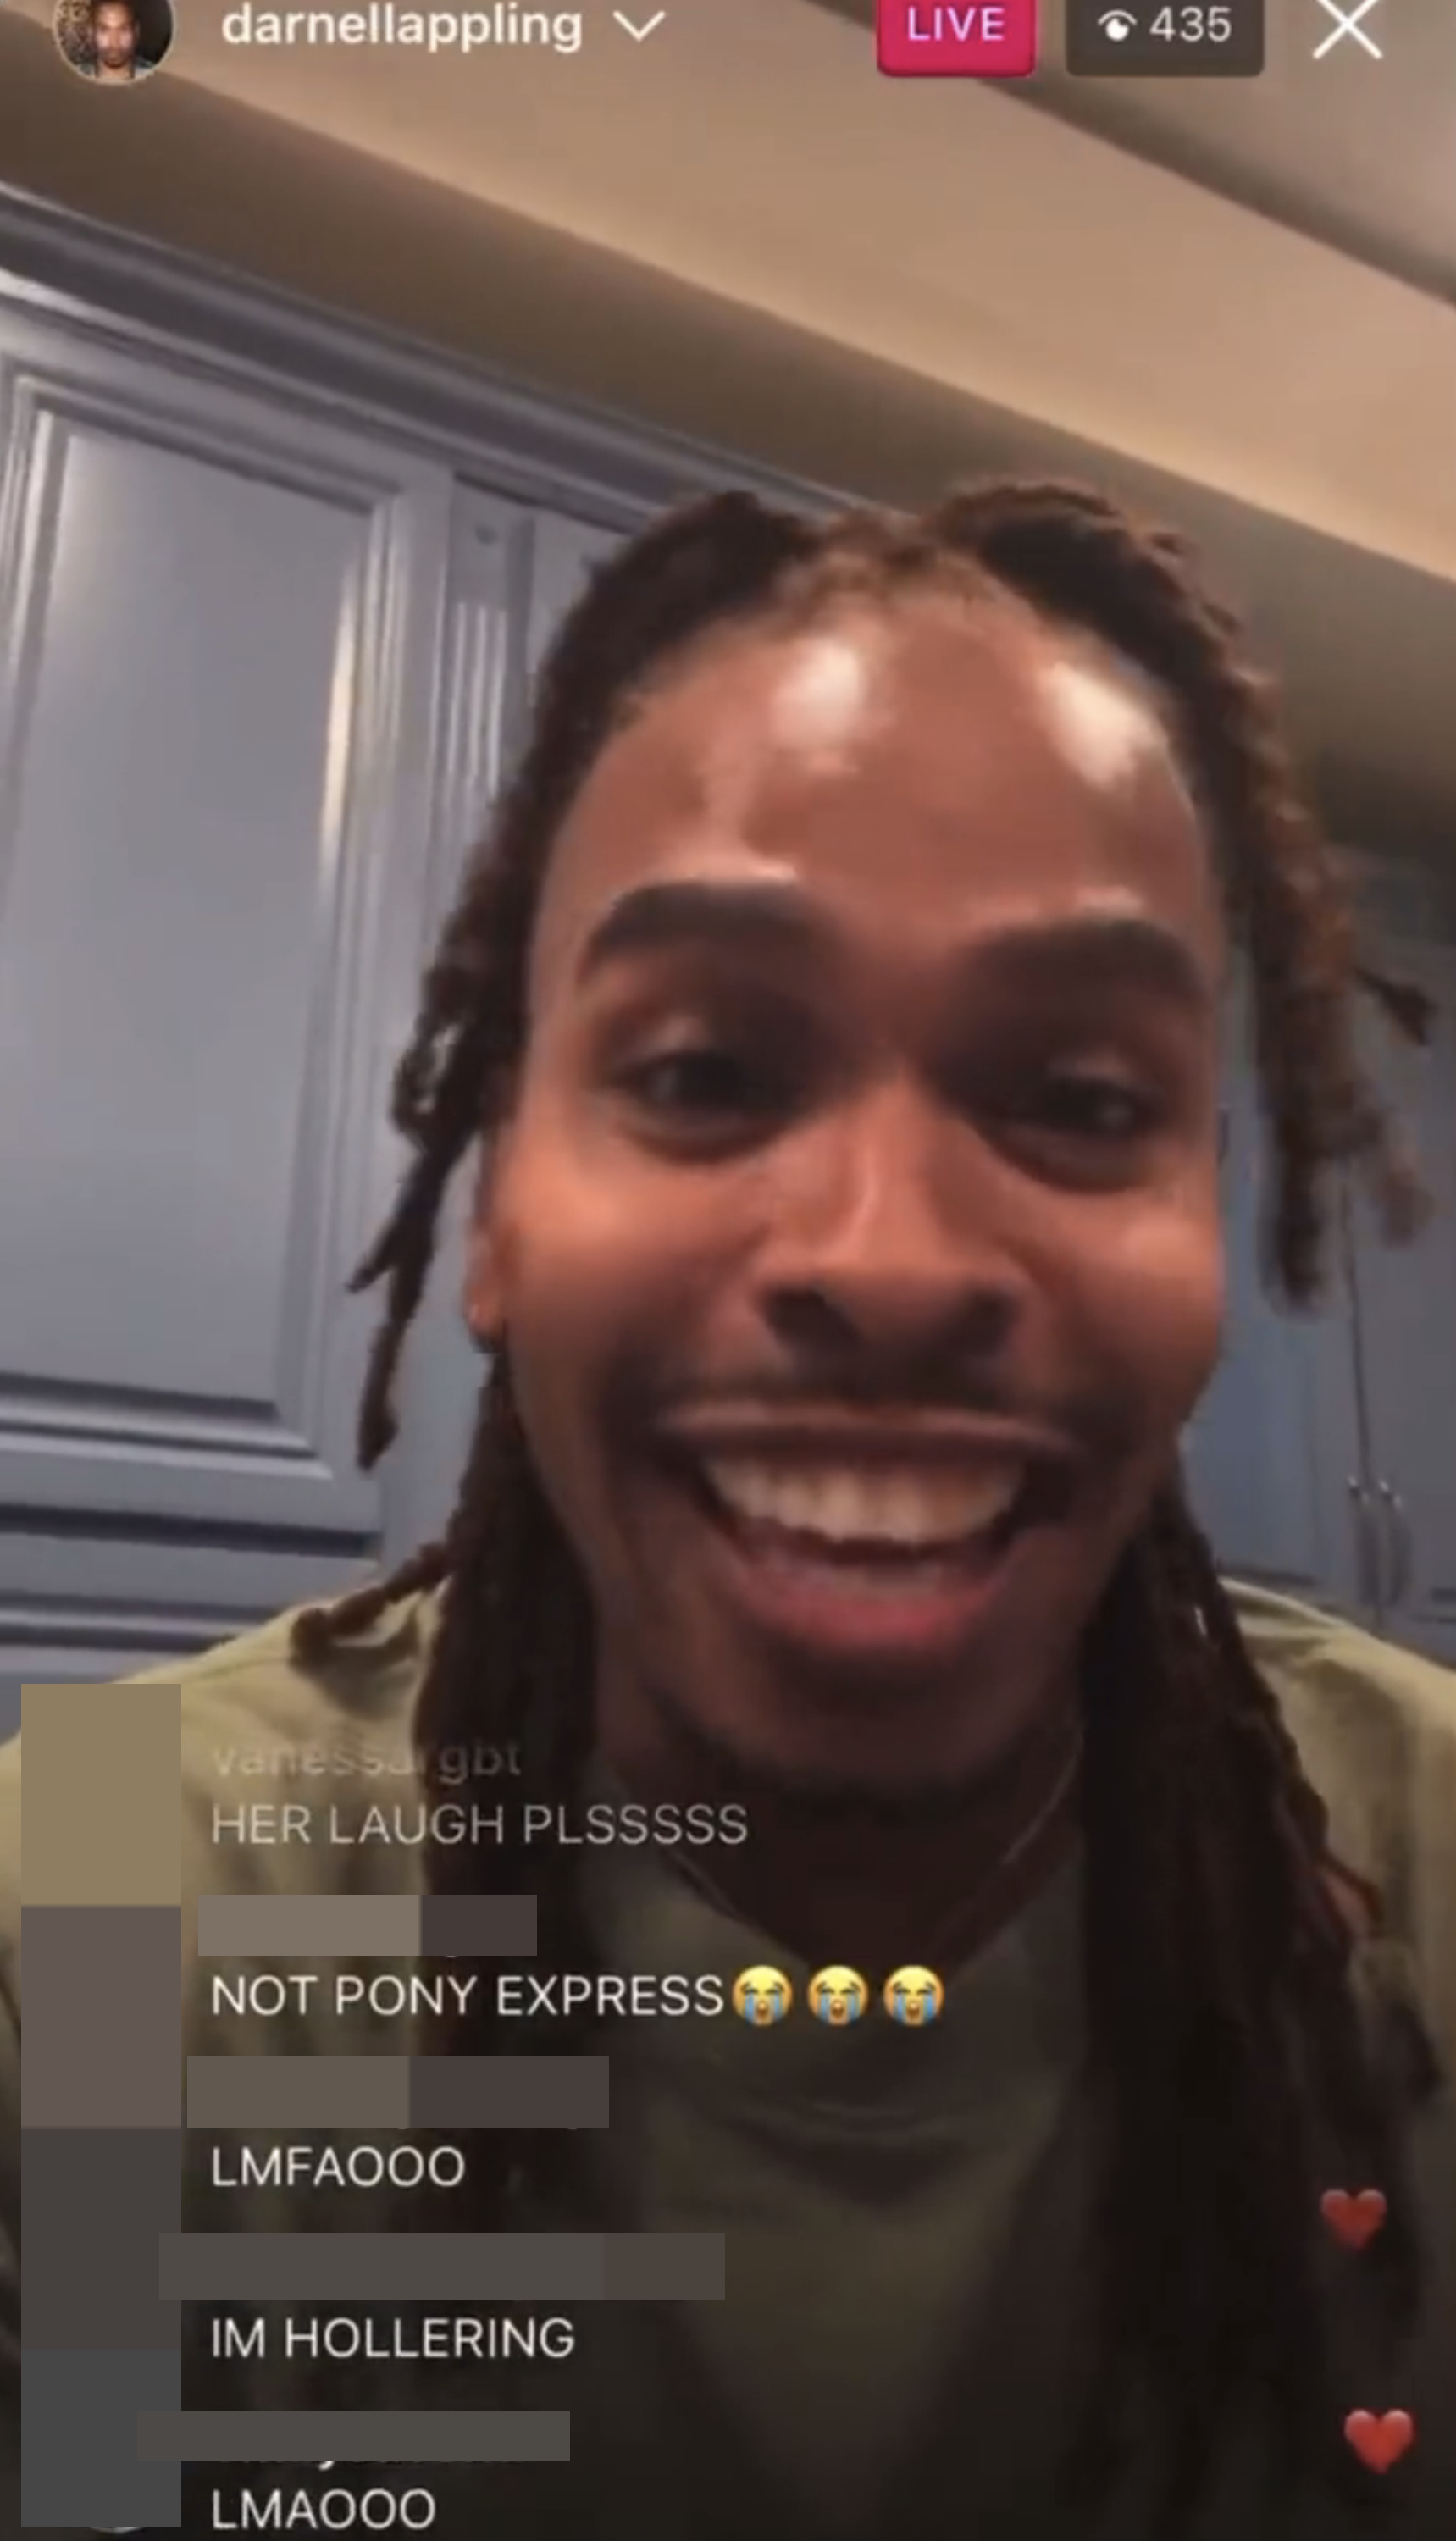 A screenshot of Darnell on Instagram live with people&#x27;s comments laughing